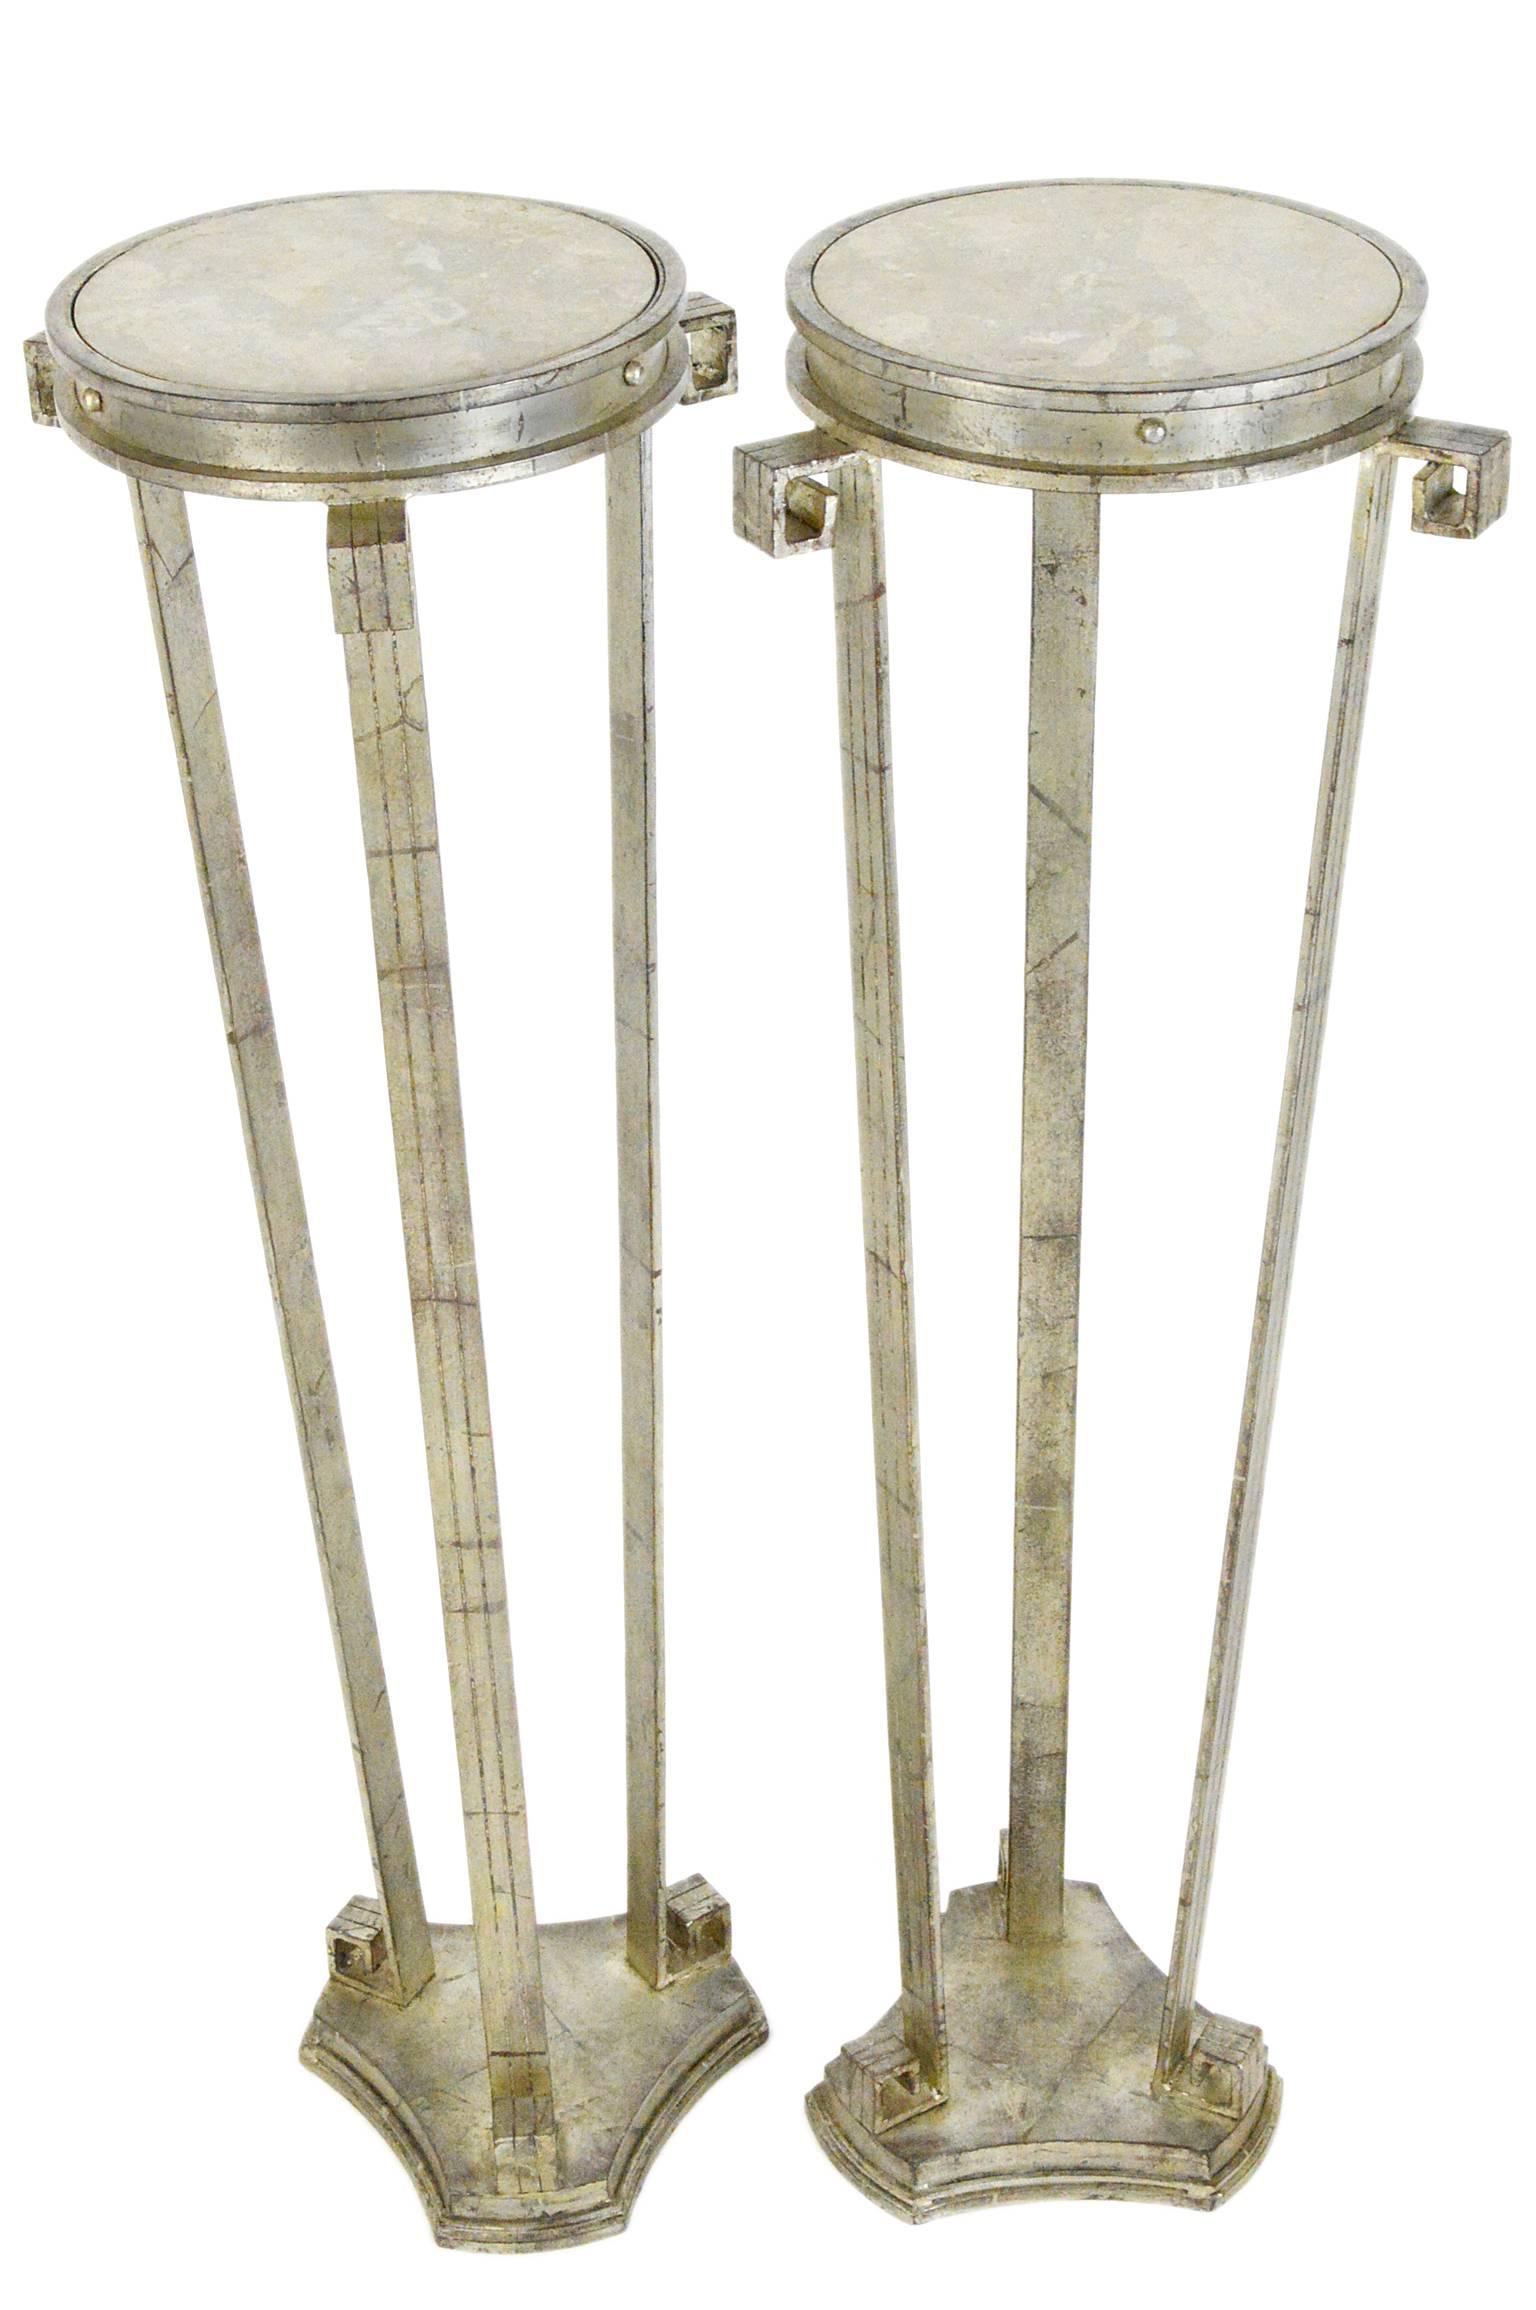 Fantastic Pair of Art Deco Style Silver Leafed Marble-Top Iron Pedestals For Sale 2